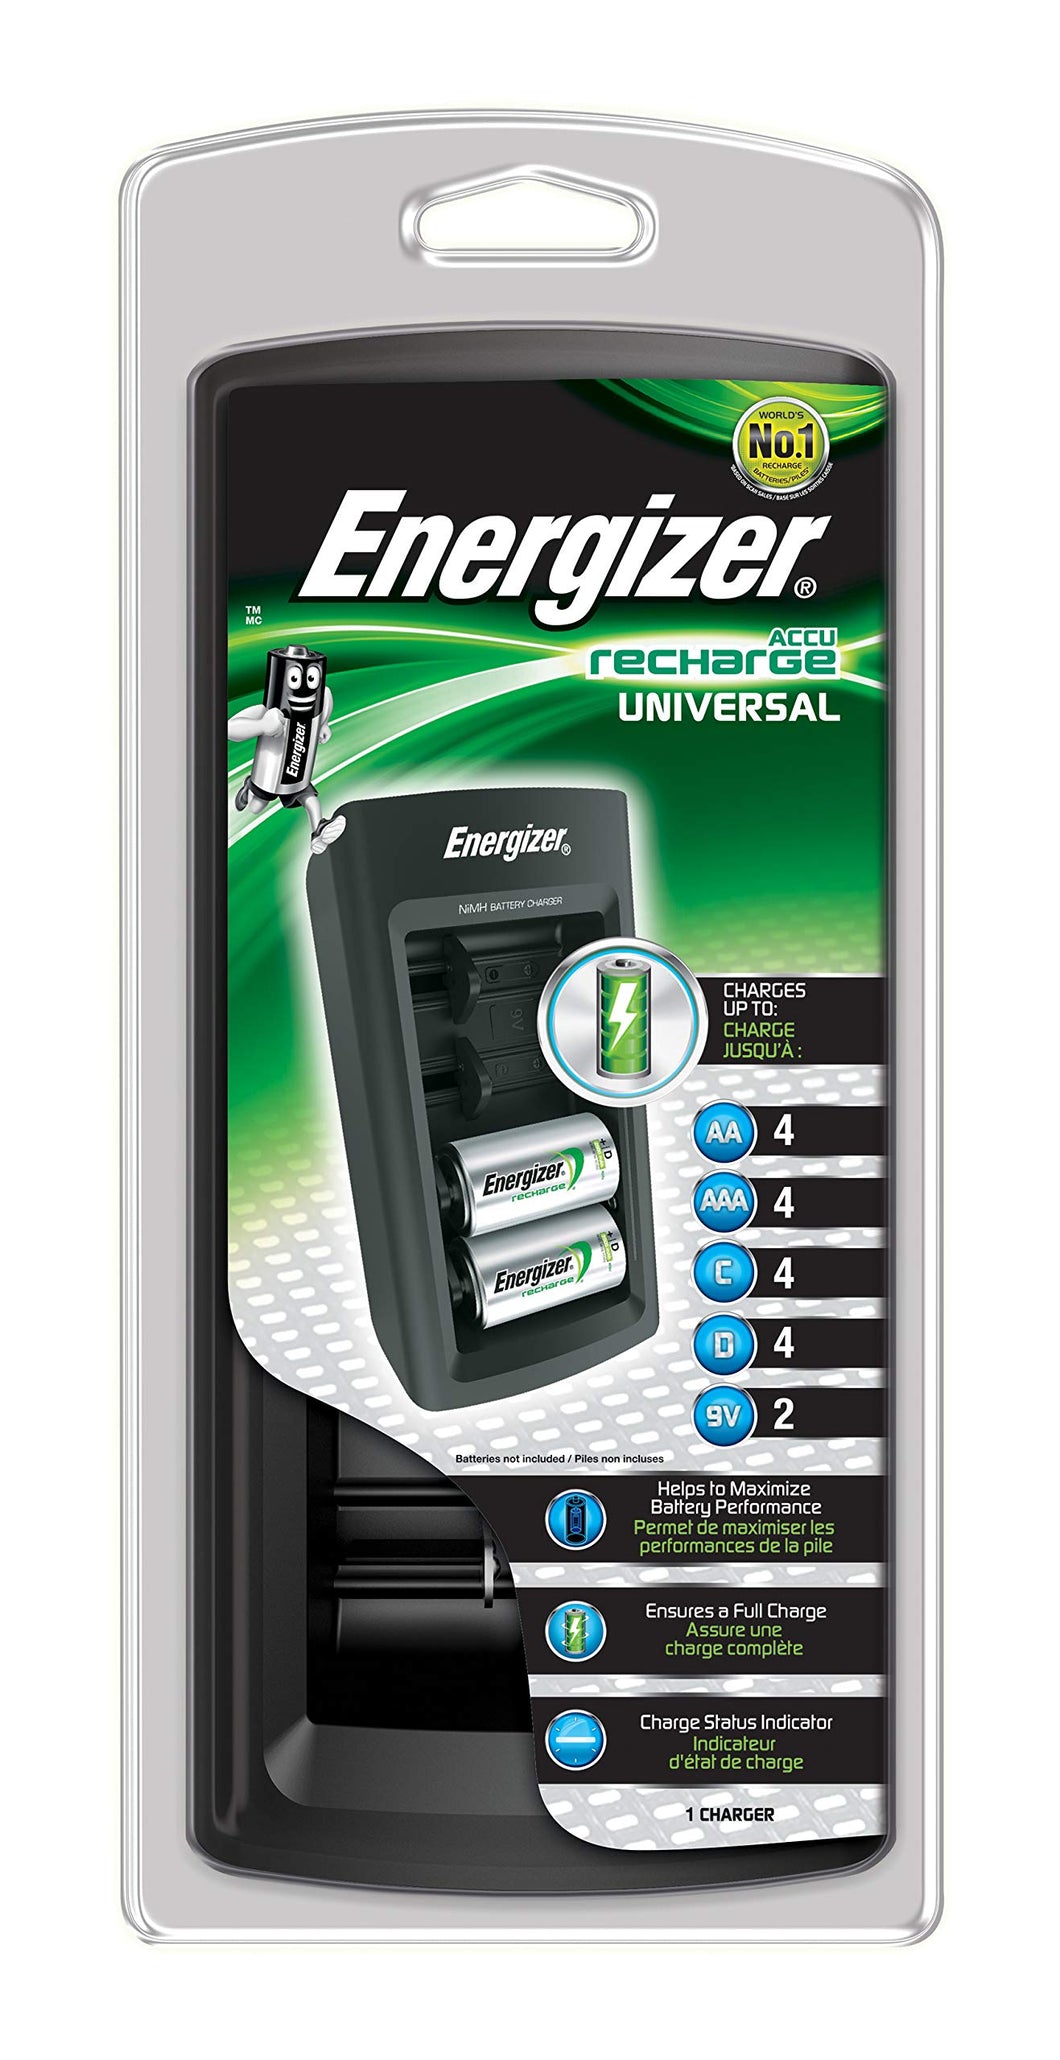 Energizer Universal Battery Charger Mains